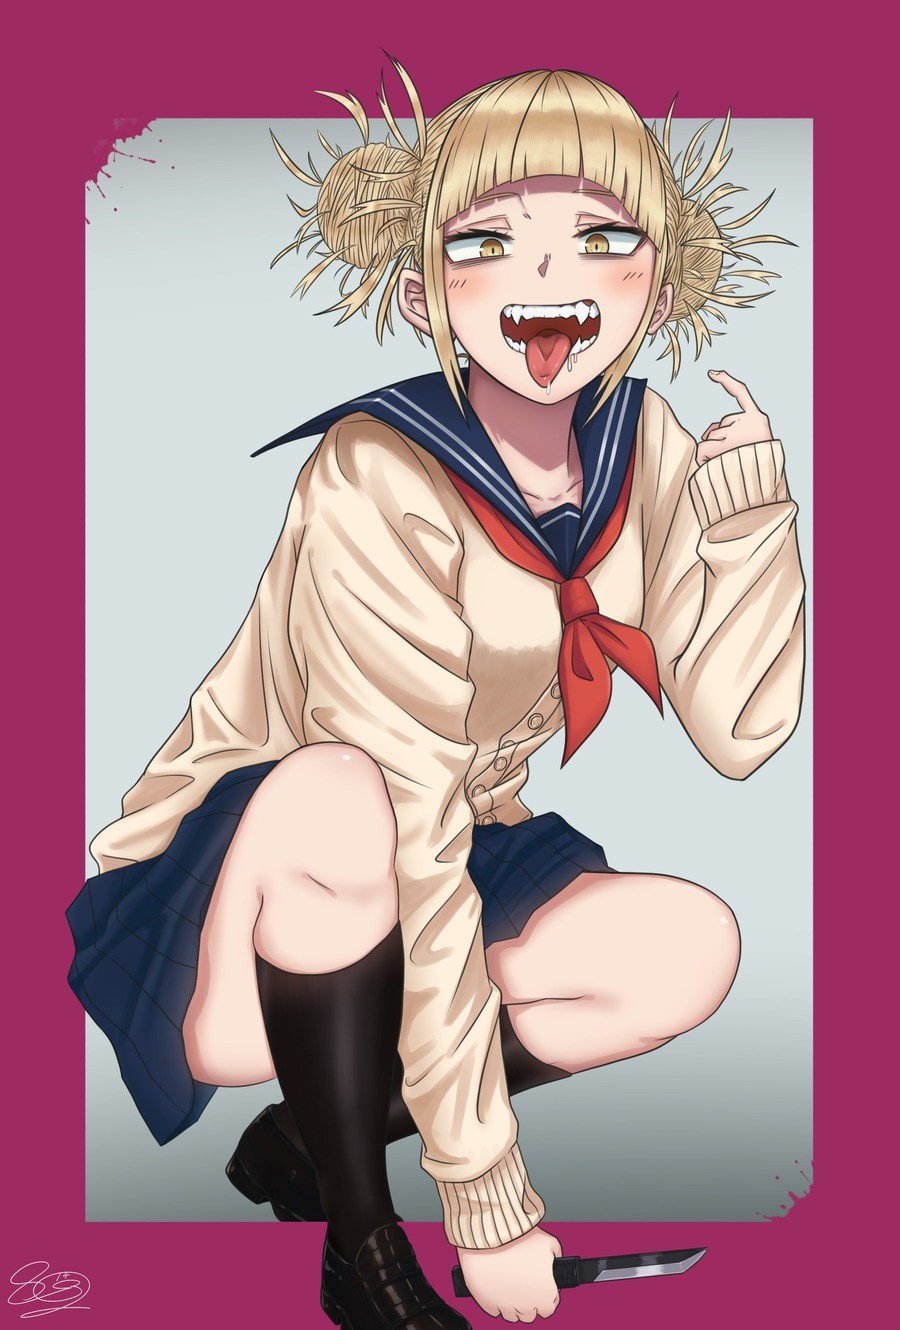 Daily Toga - 635: Tongue. join list: DailyToga (477 subs)Mention History Source: .. want to sex toga